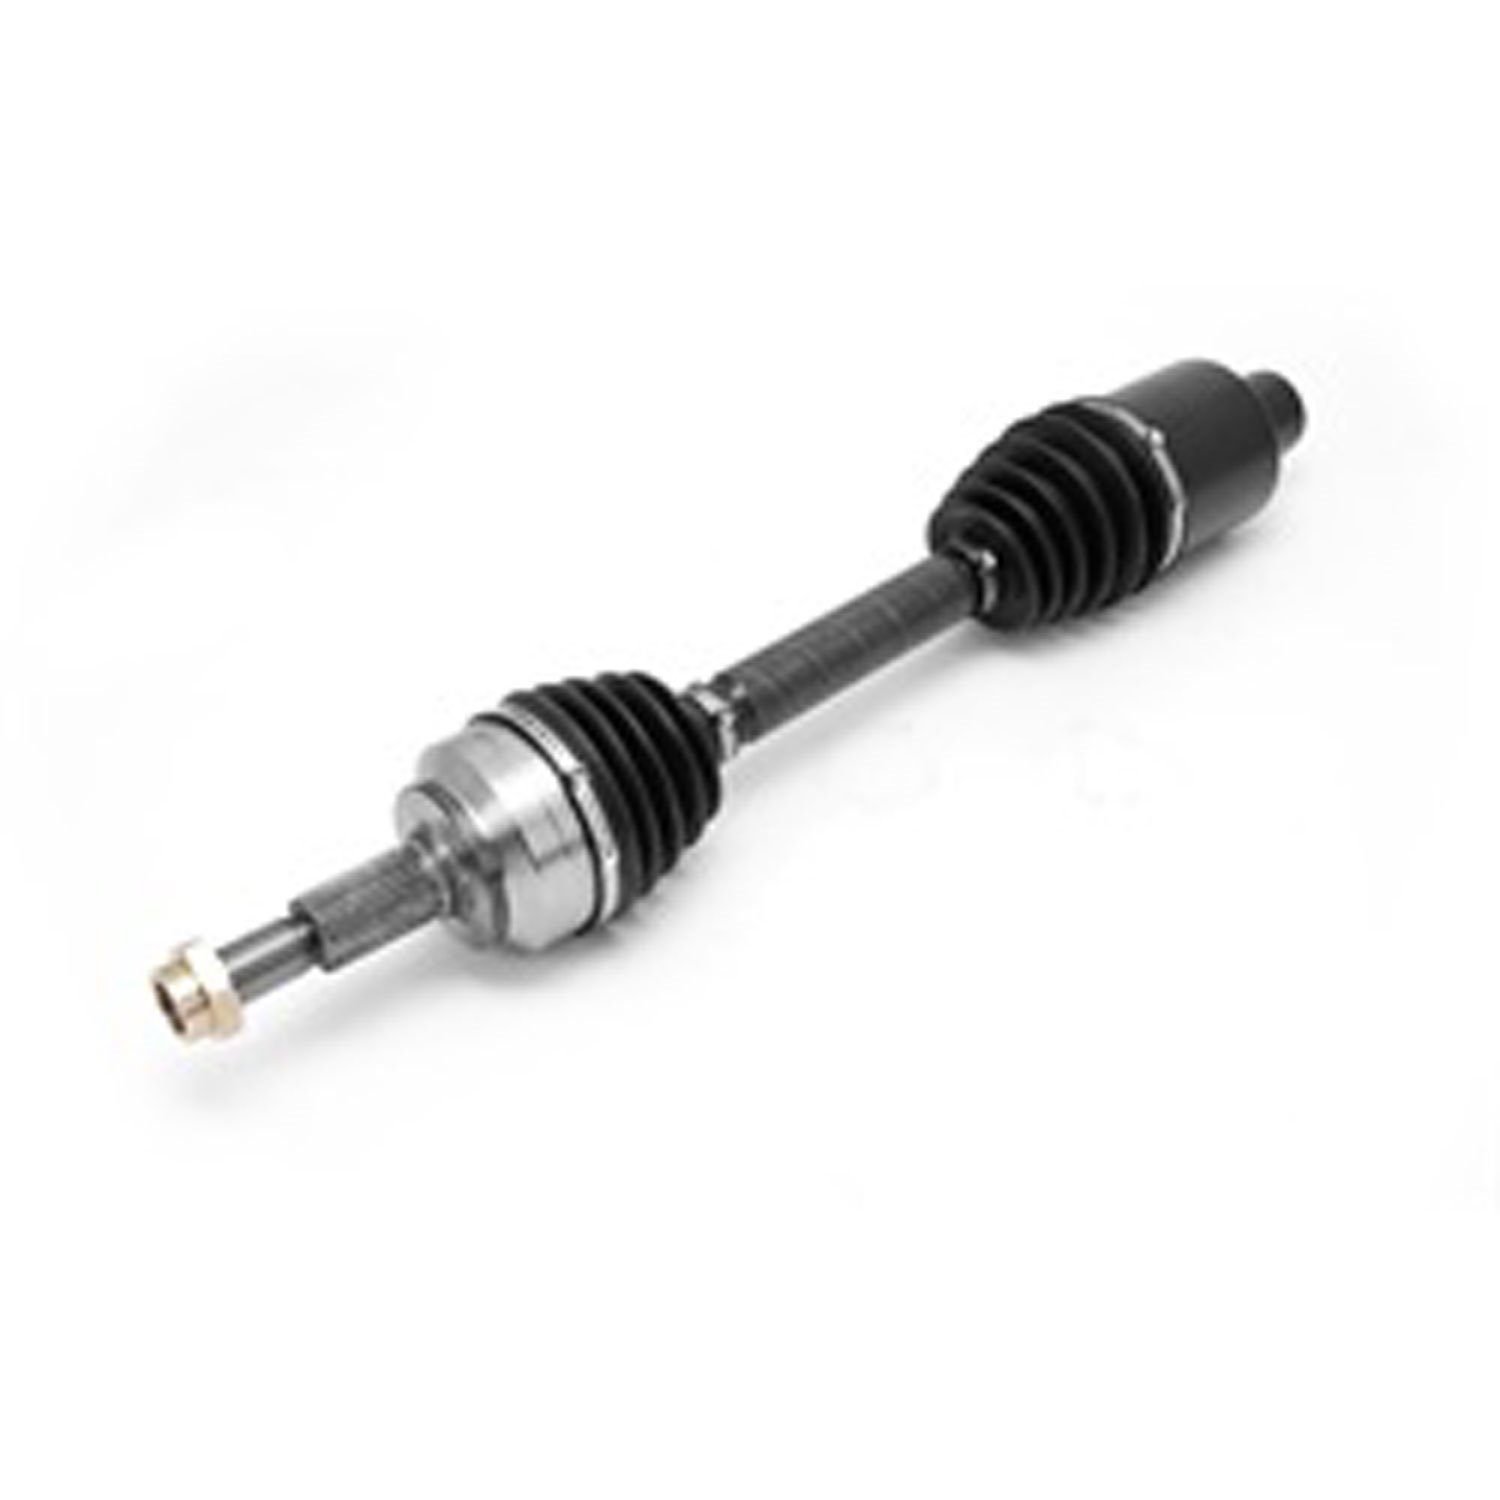 Replacement front CV axle shaft for Super Dana 30 from Omix-ADA, Fits right side of 05-10 Jeep Grand Cherokee WK